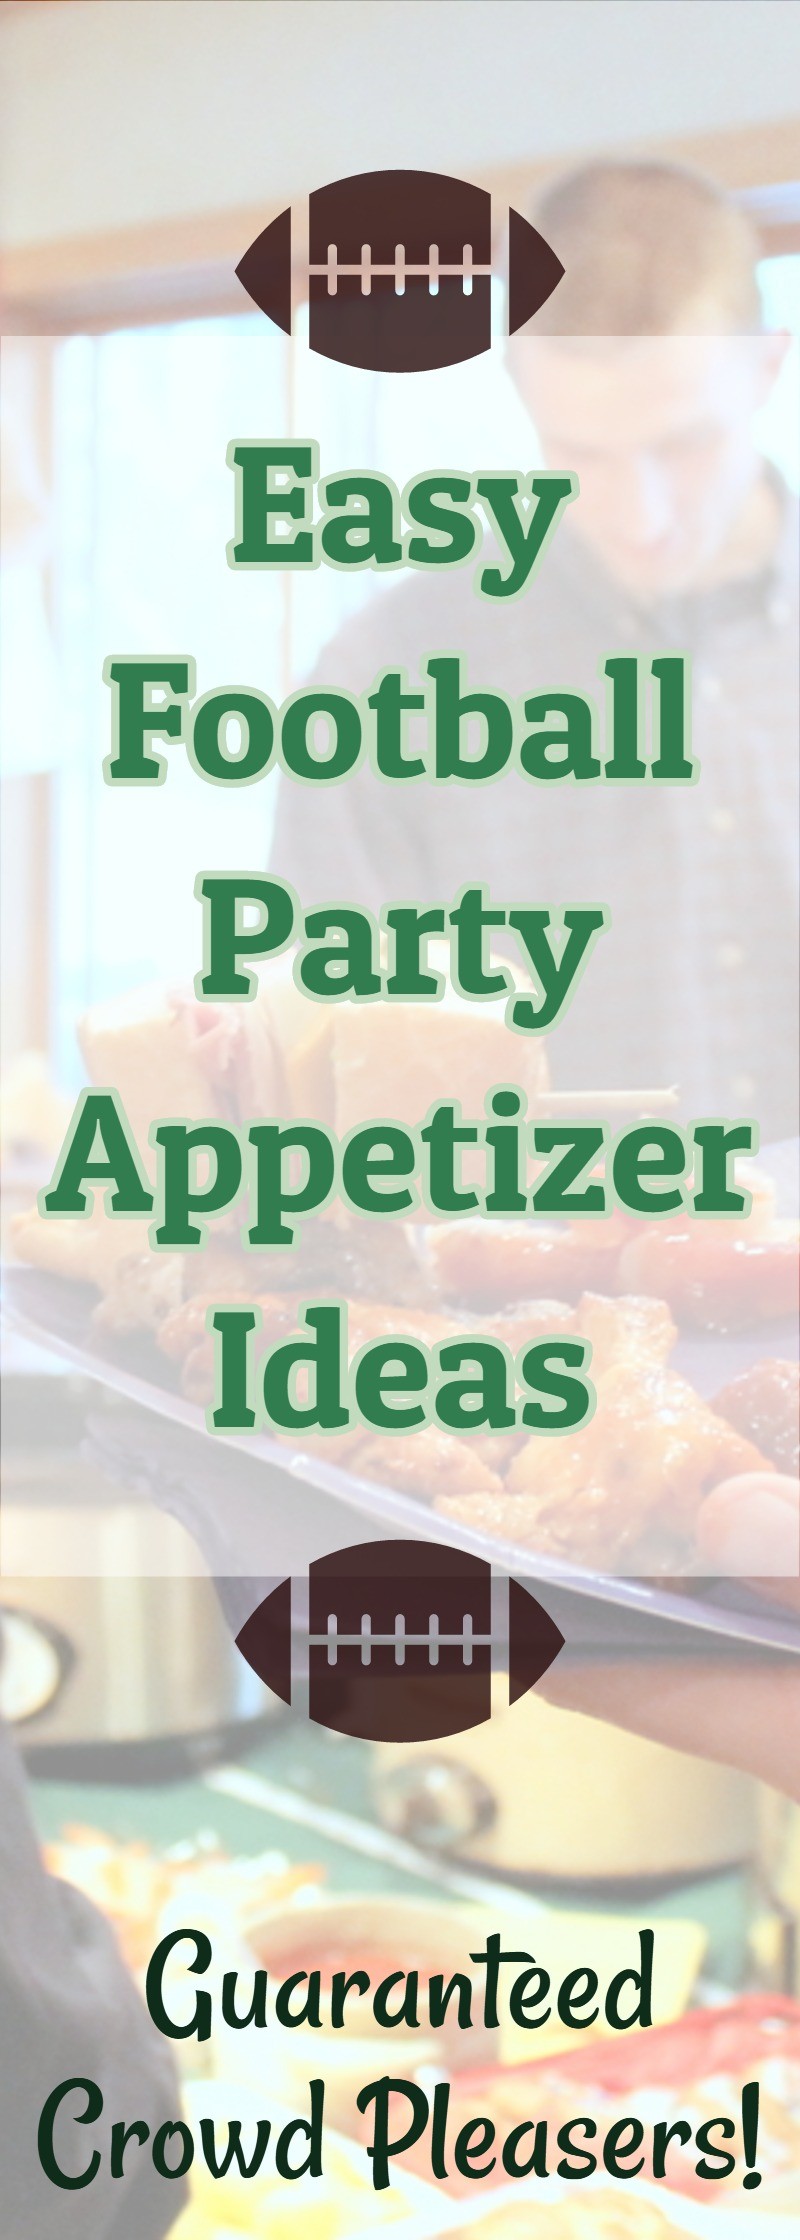 Football Party Easy Appetizer Ideas - Guaranteed Crowd Pleasers!